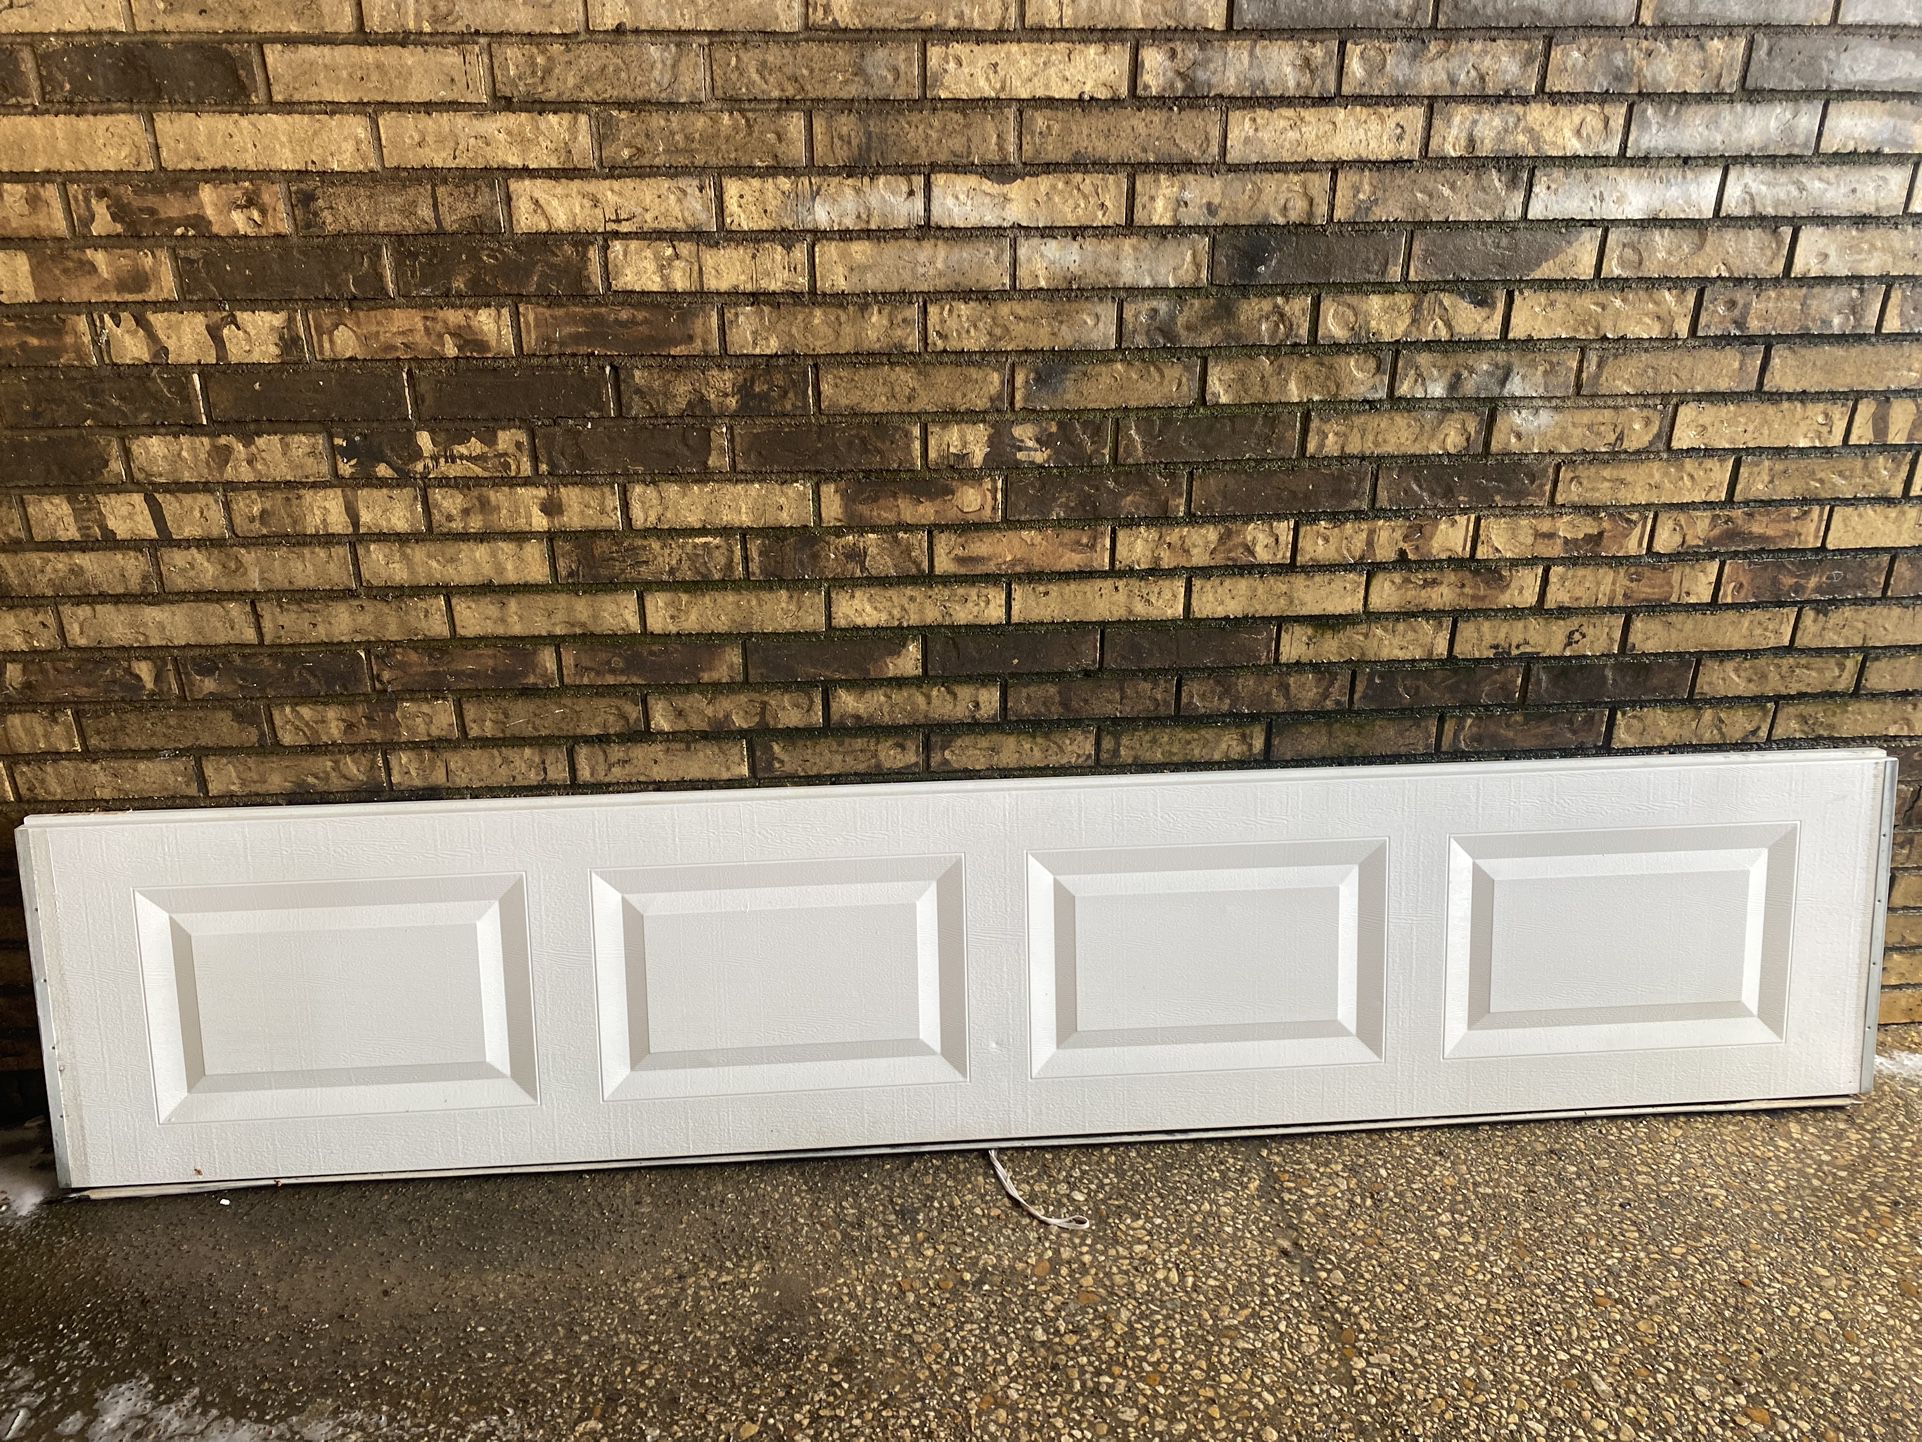 9ft wide by 7 ft tall used garage door